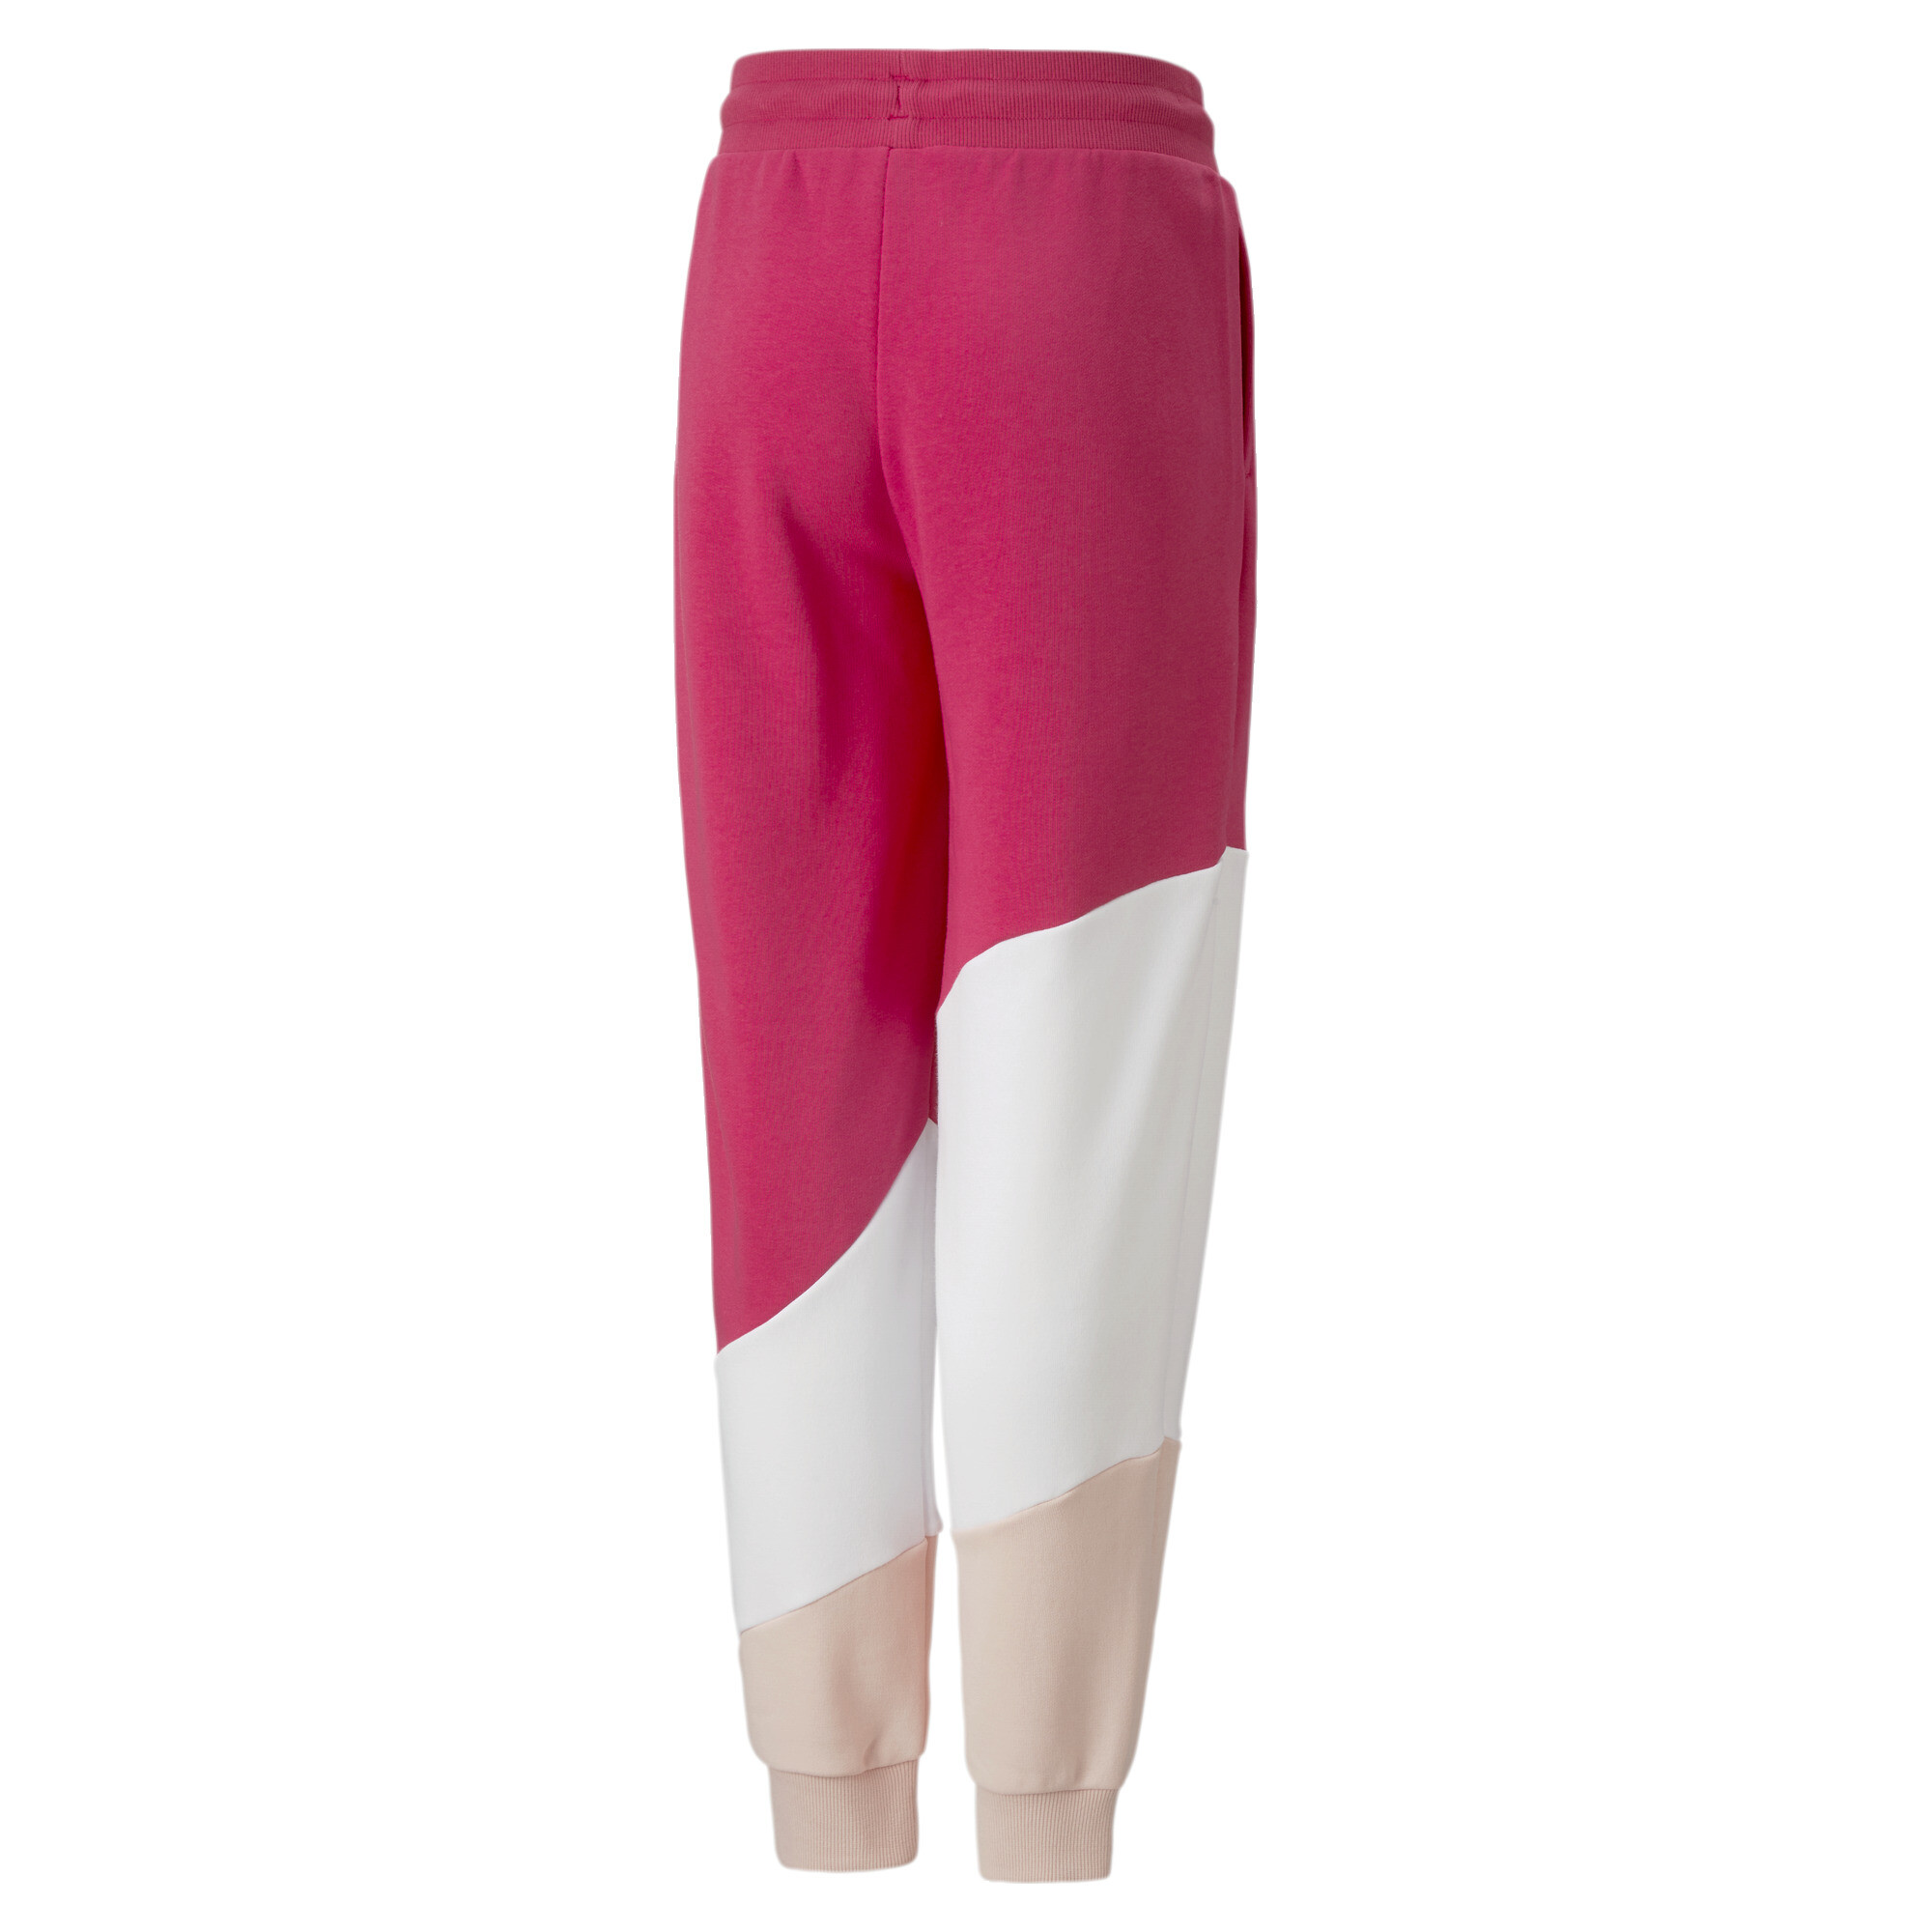 PUMA POWER Cat Pants In Pink, Size 13-14 Youth